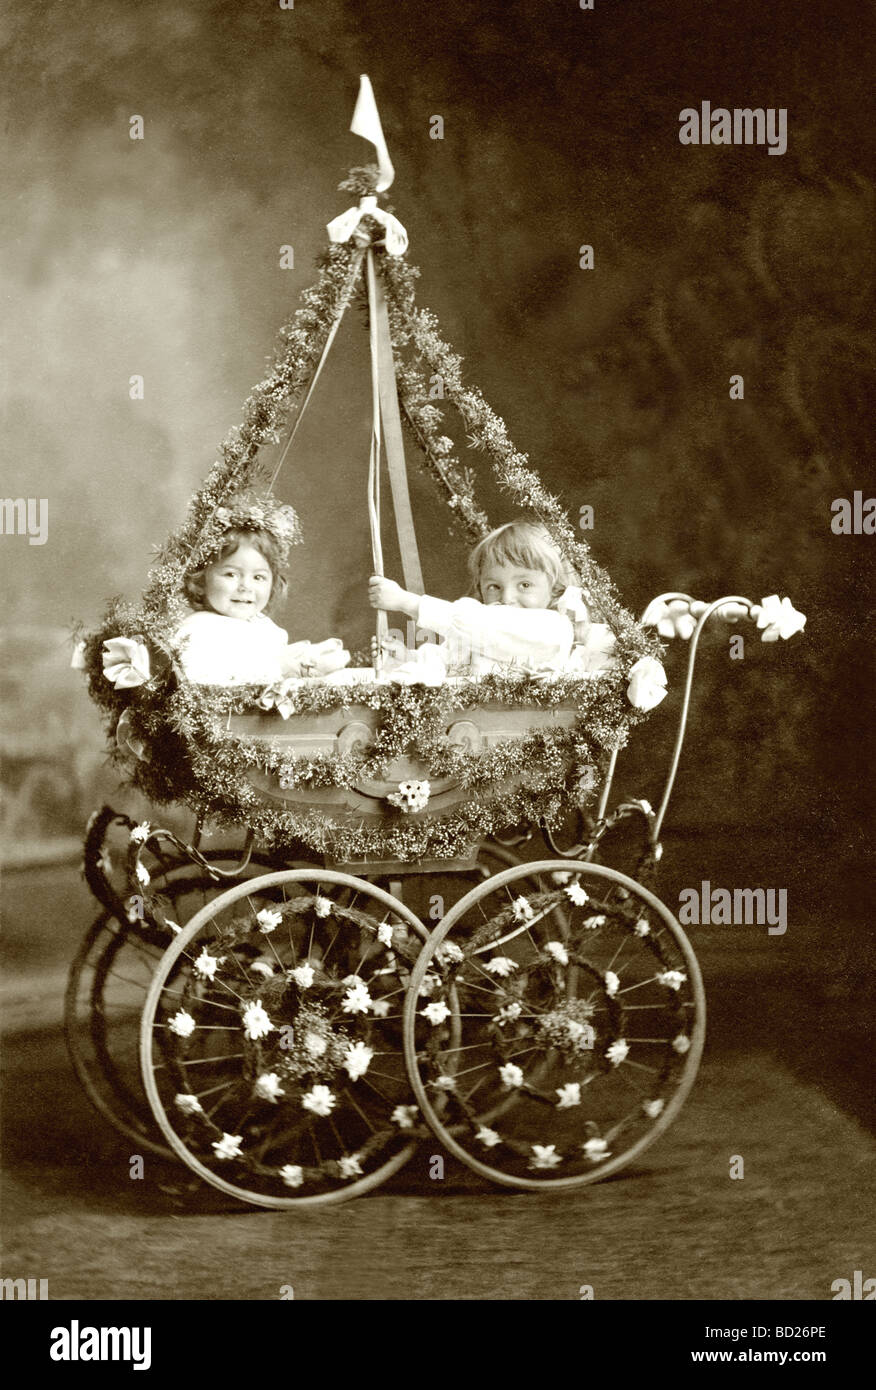 Two Infants in Floral Decorated Baby Carriage Stock Photo